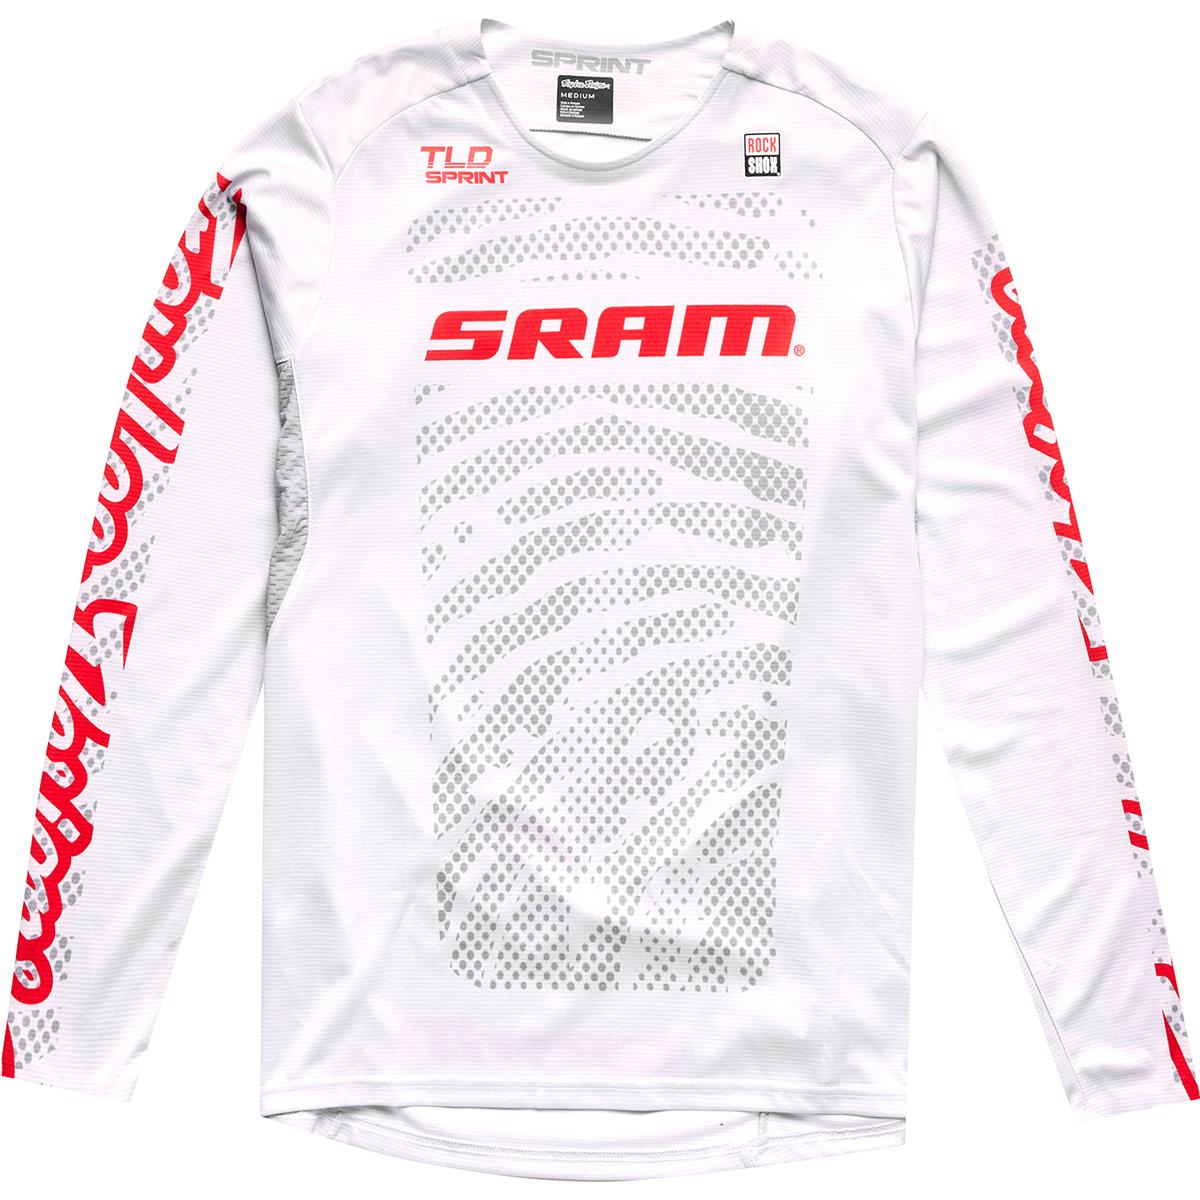 Troy Lee Designs MTB Jersey Long Sleeve Sprint Sram - Shifted Cement